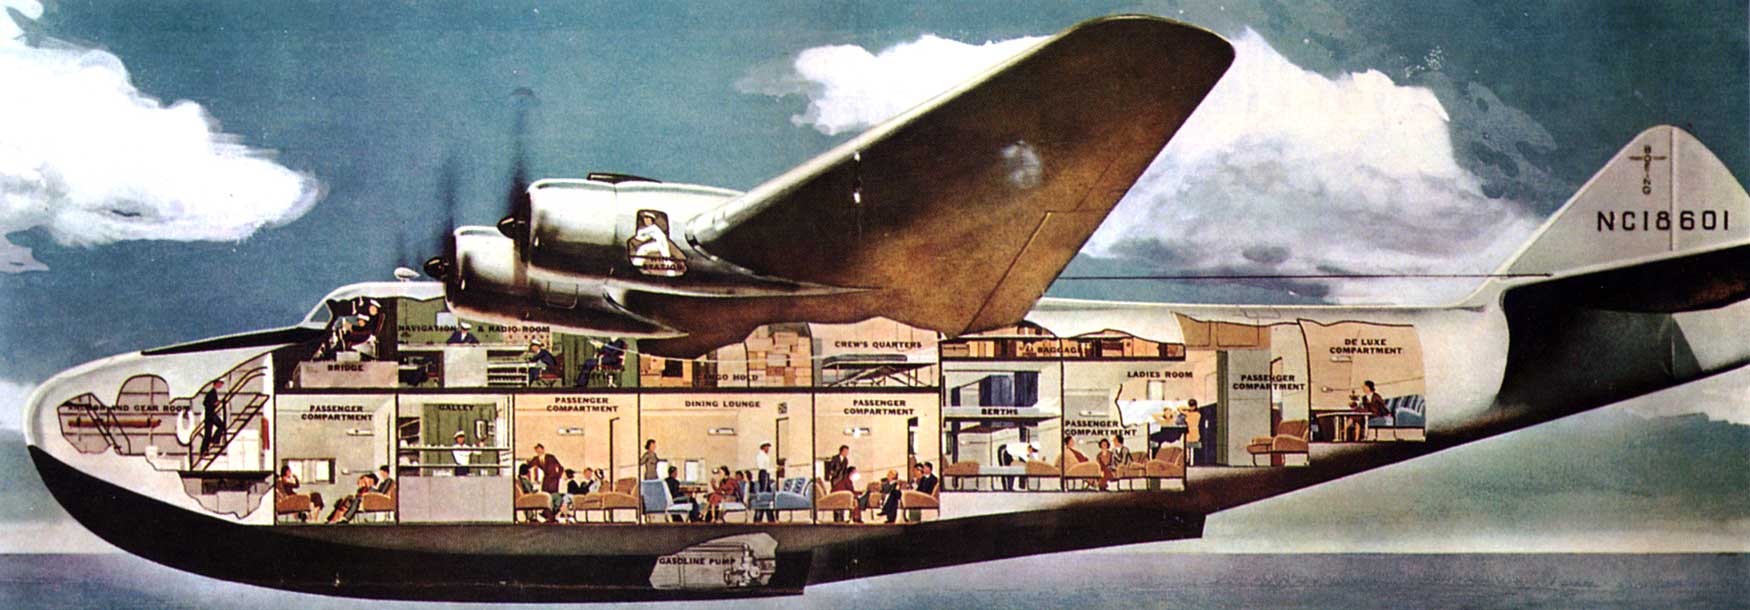 Imperial Airways And Pan Am Their Business Plans Were Very